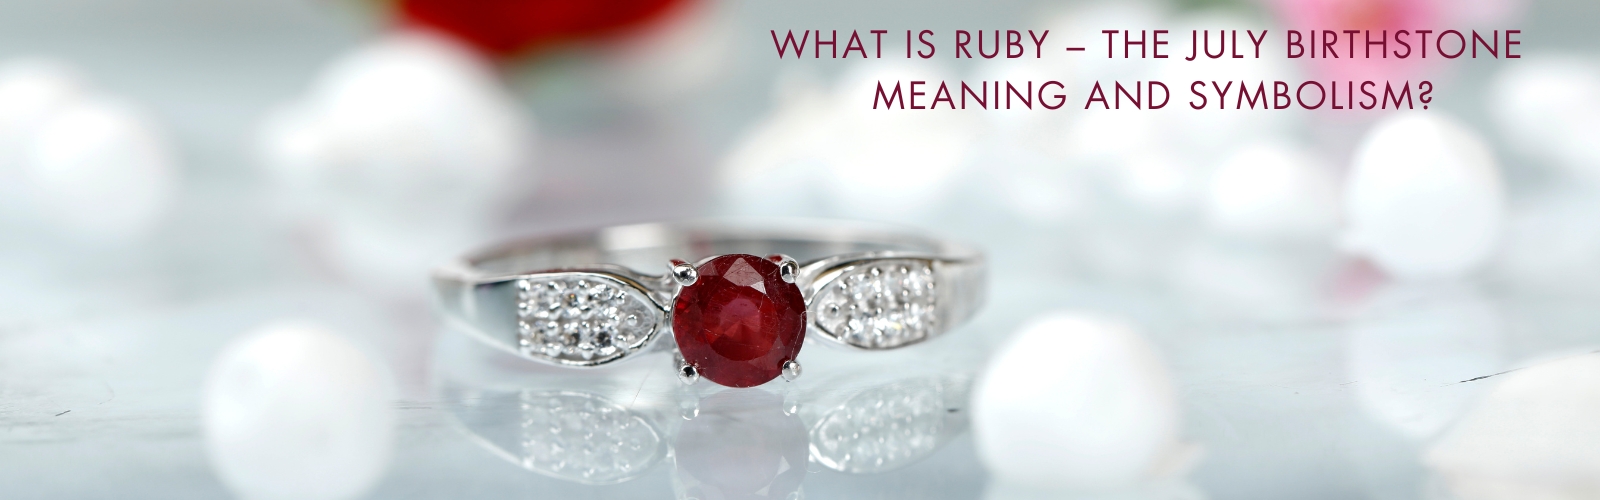 what is ruby the july birthstone meaning and symbolism